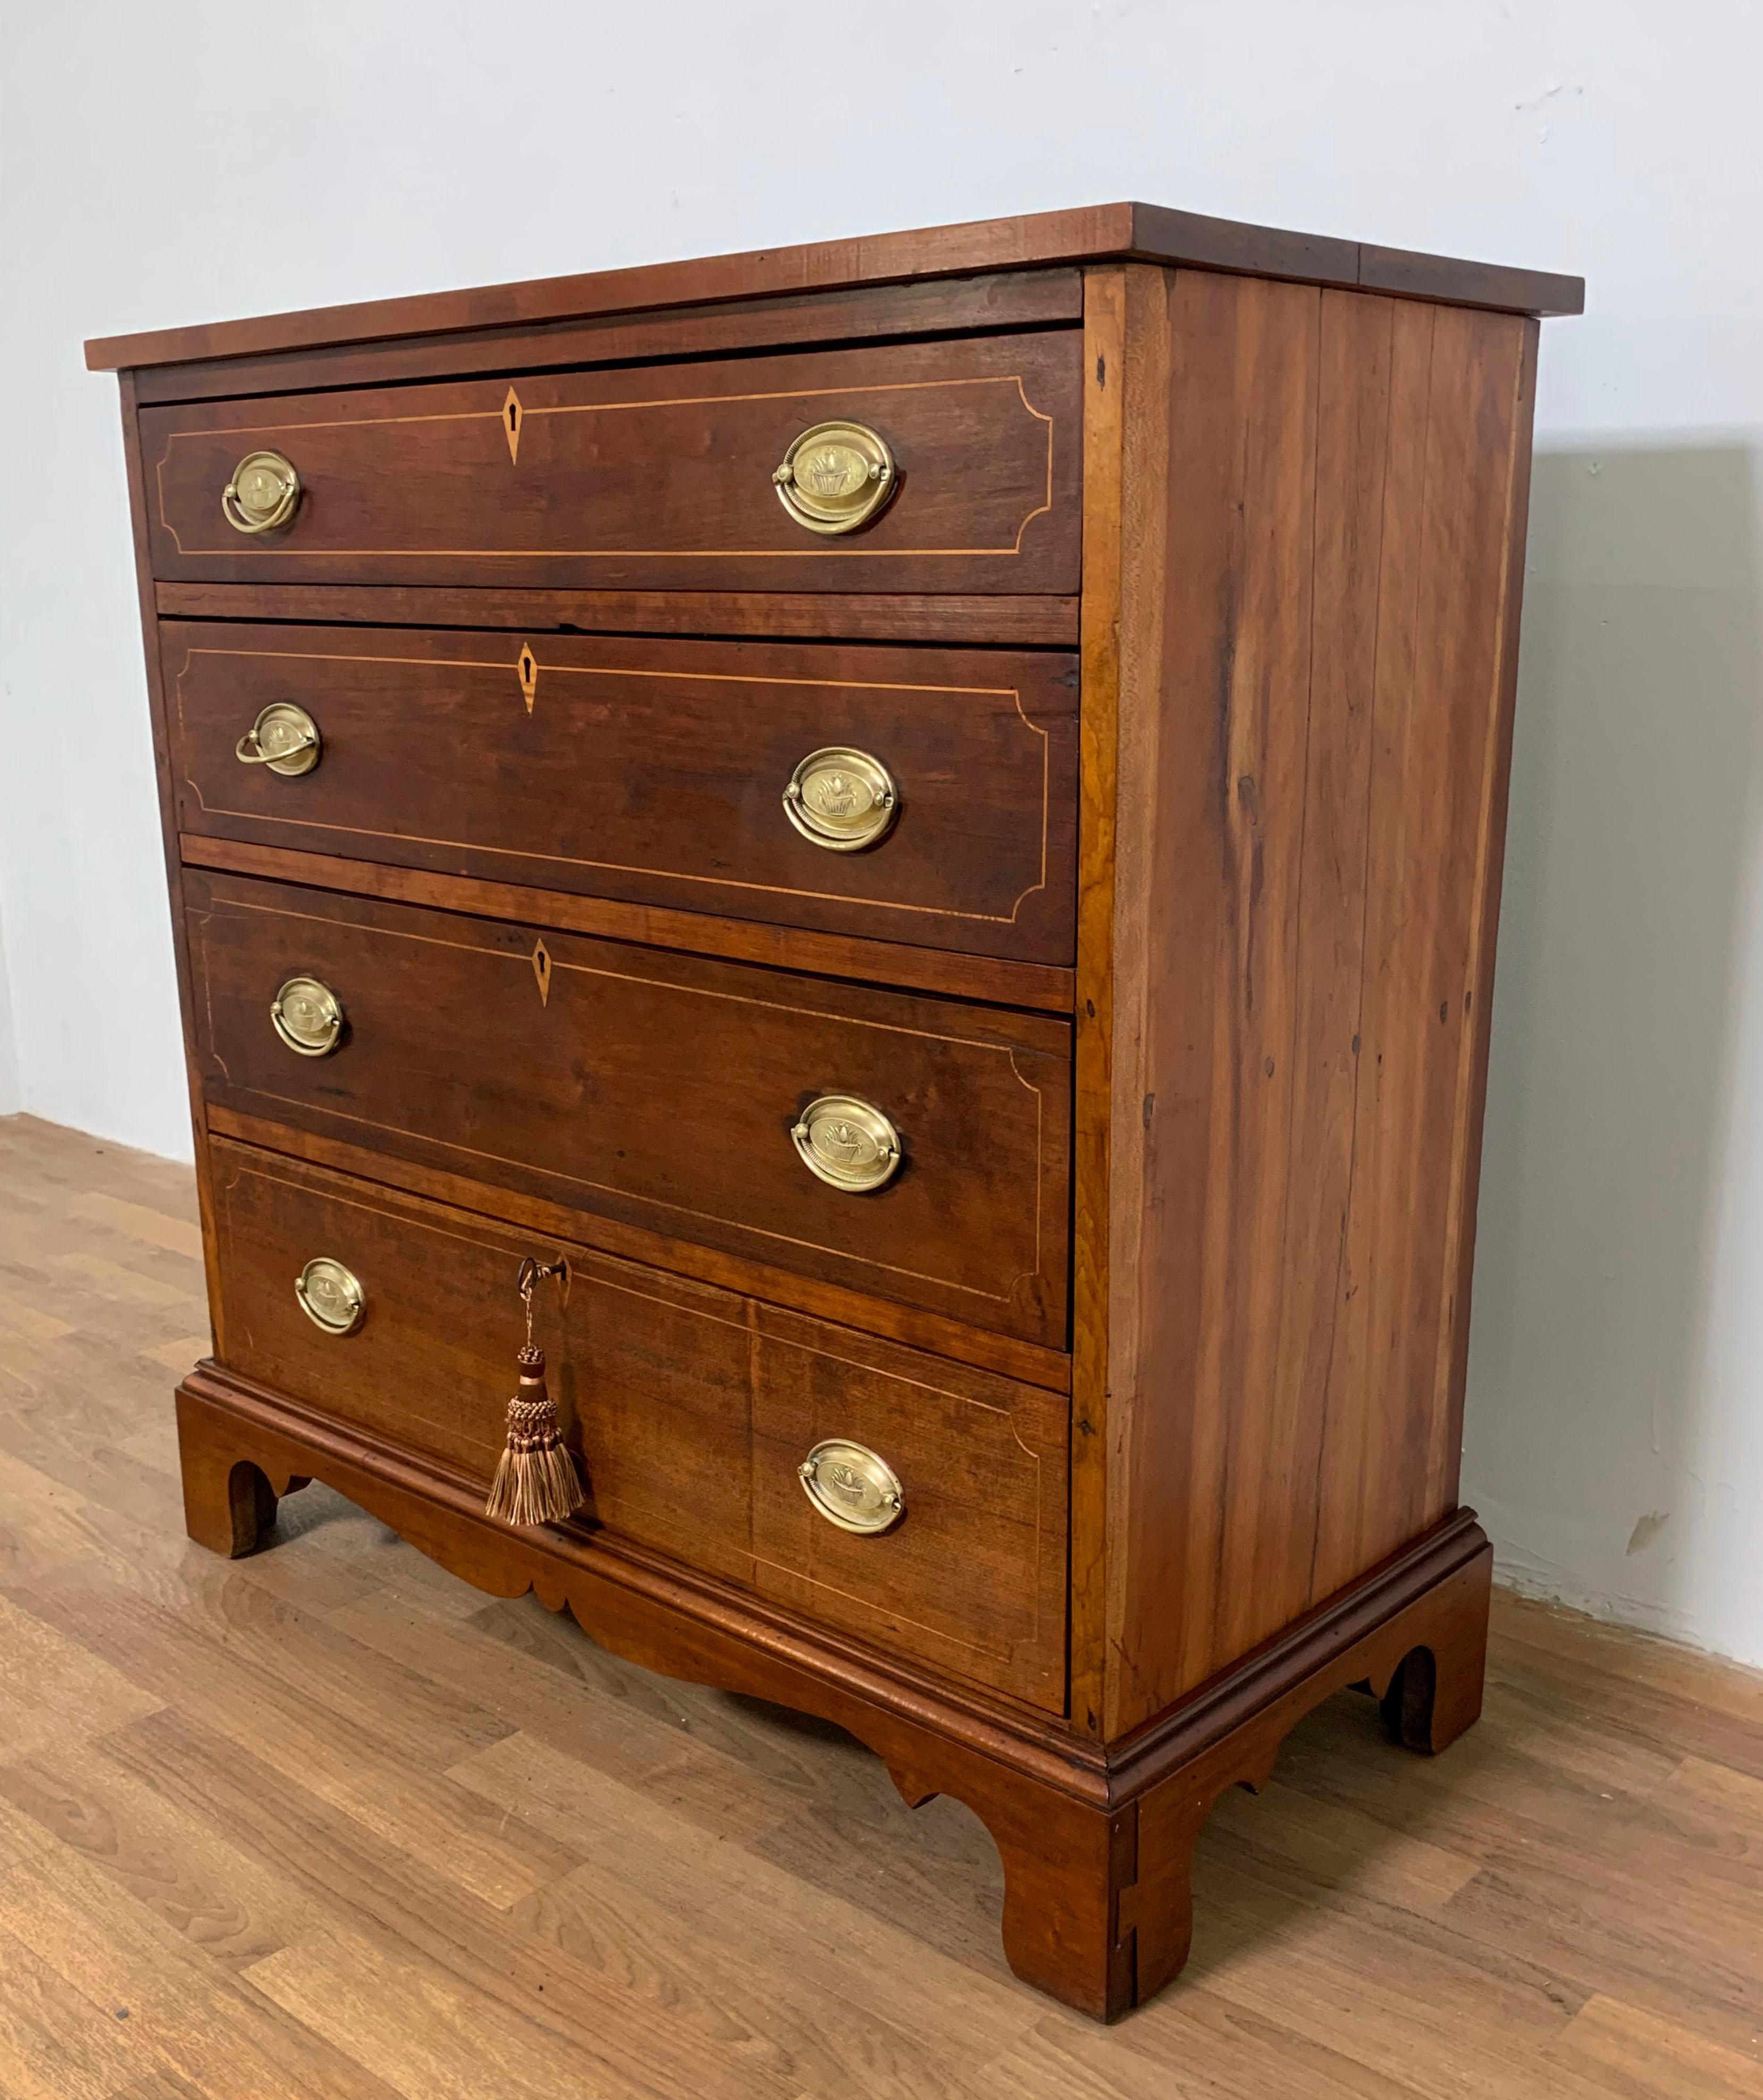 Ca. 1800s Hepplewhite mahogany chest of four string inlayed drawers. Original brasses which have been recently polished. As the secondary wood is oak, this most likely is of English origin. Note the key does not turn in the lock and is for